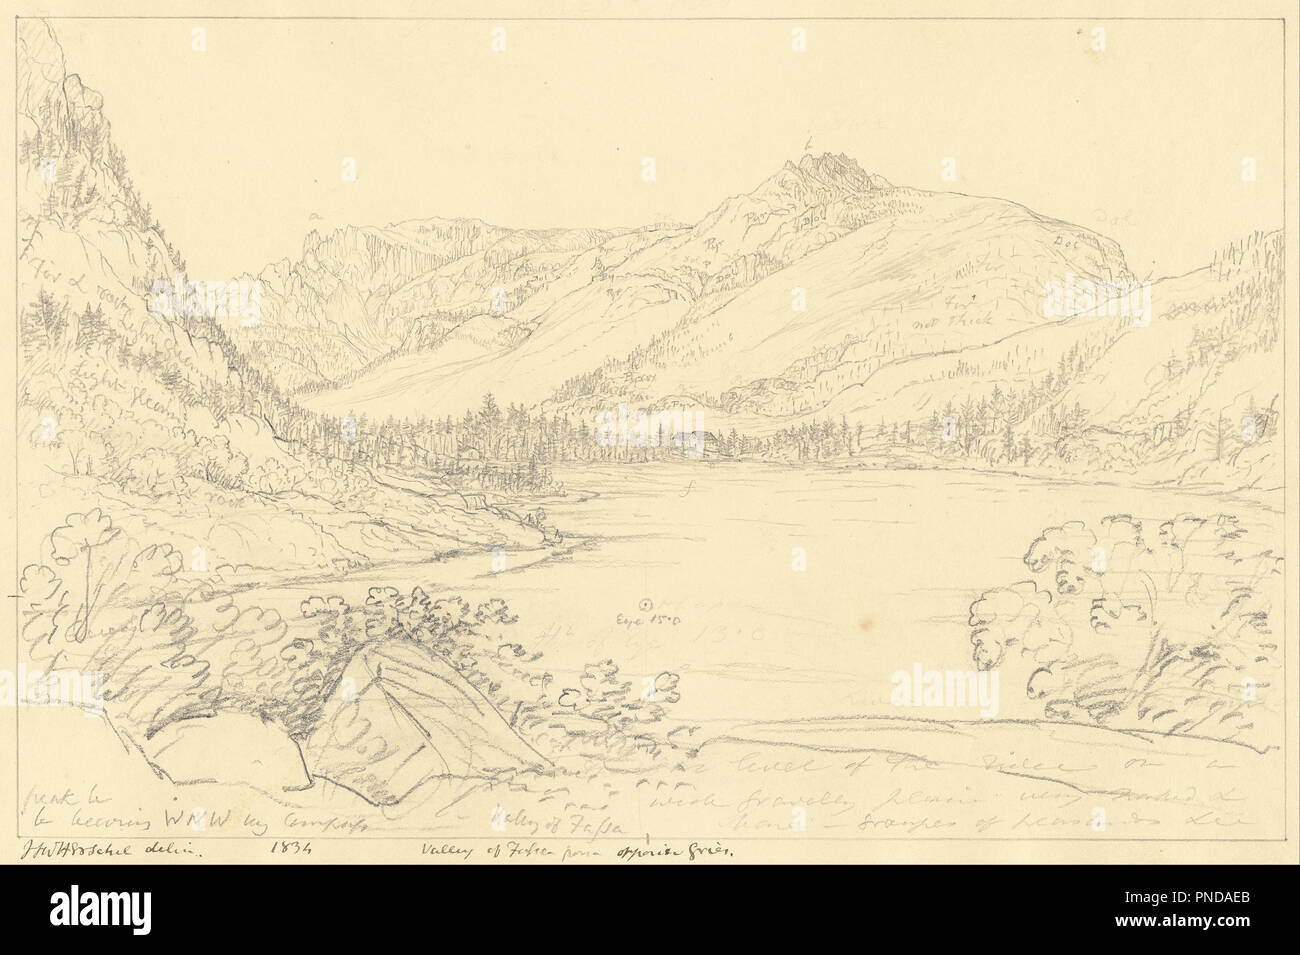 Valley of Fassa from Opposite Gries. Date/Period: 1834. Graphic art. Graphite drawing made with the aid of a camera lucida. Height: 200 mm (7.87 in); Width: 308 mm (12.12 in). Author: Sir John Frederick William Herschel. Stock Photo